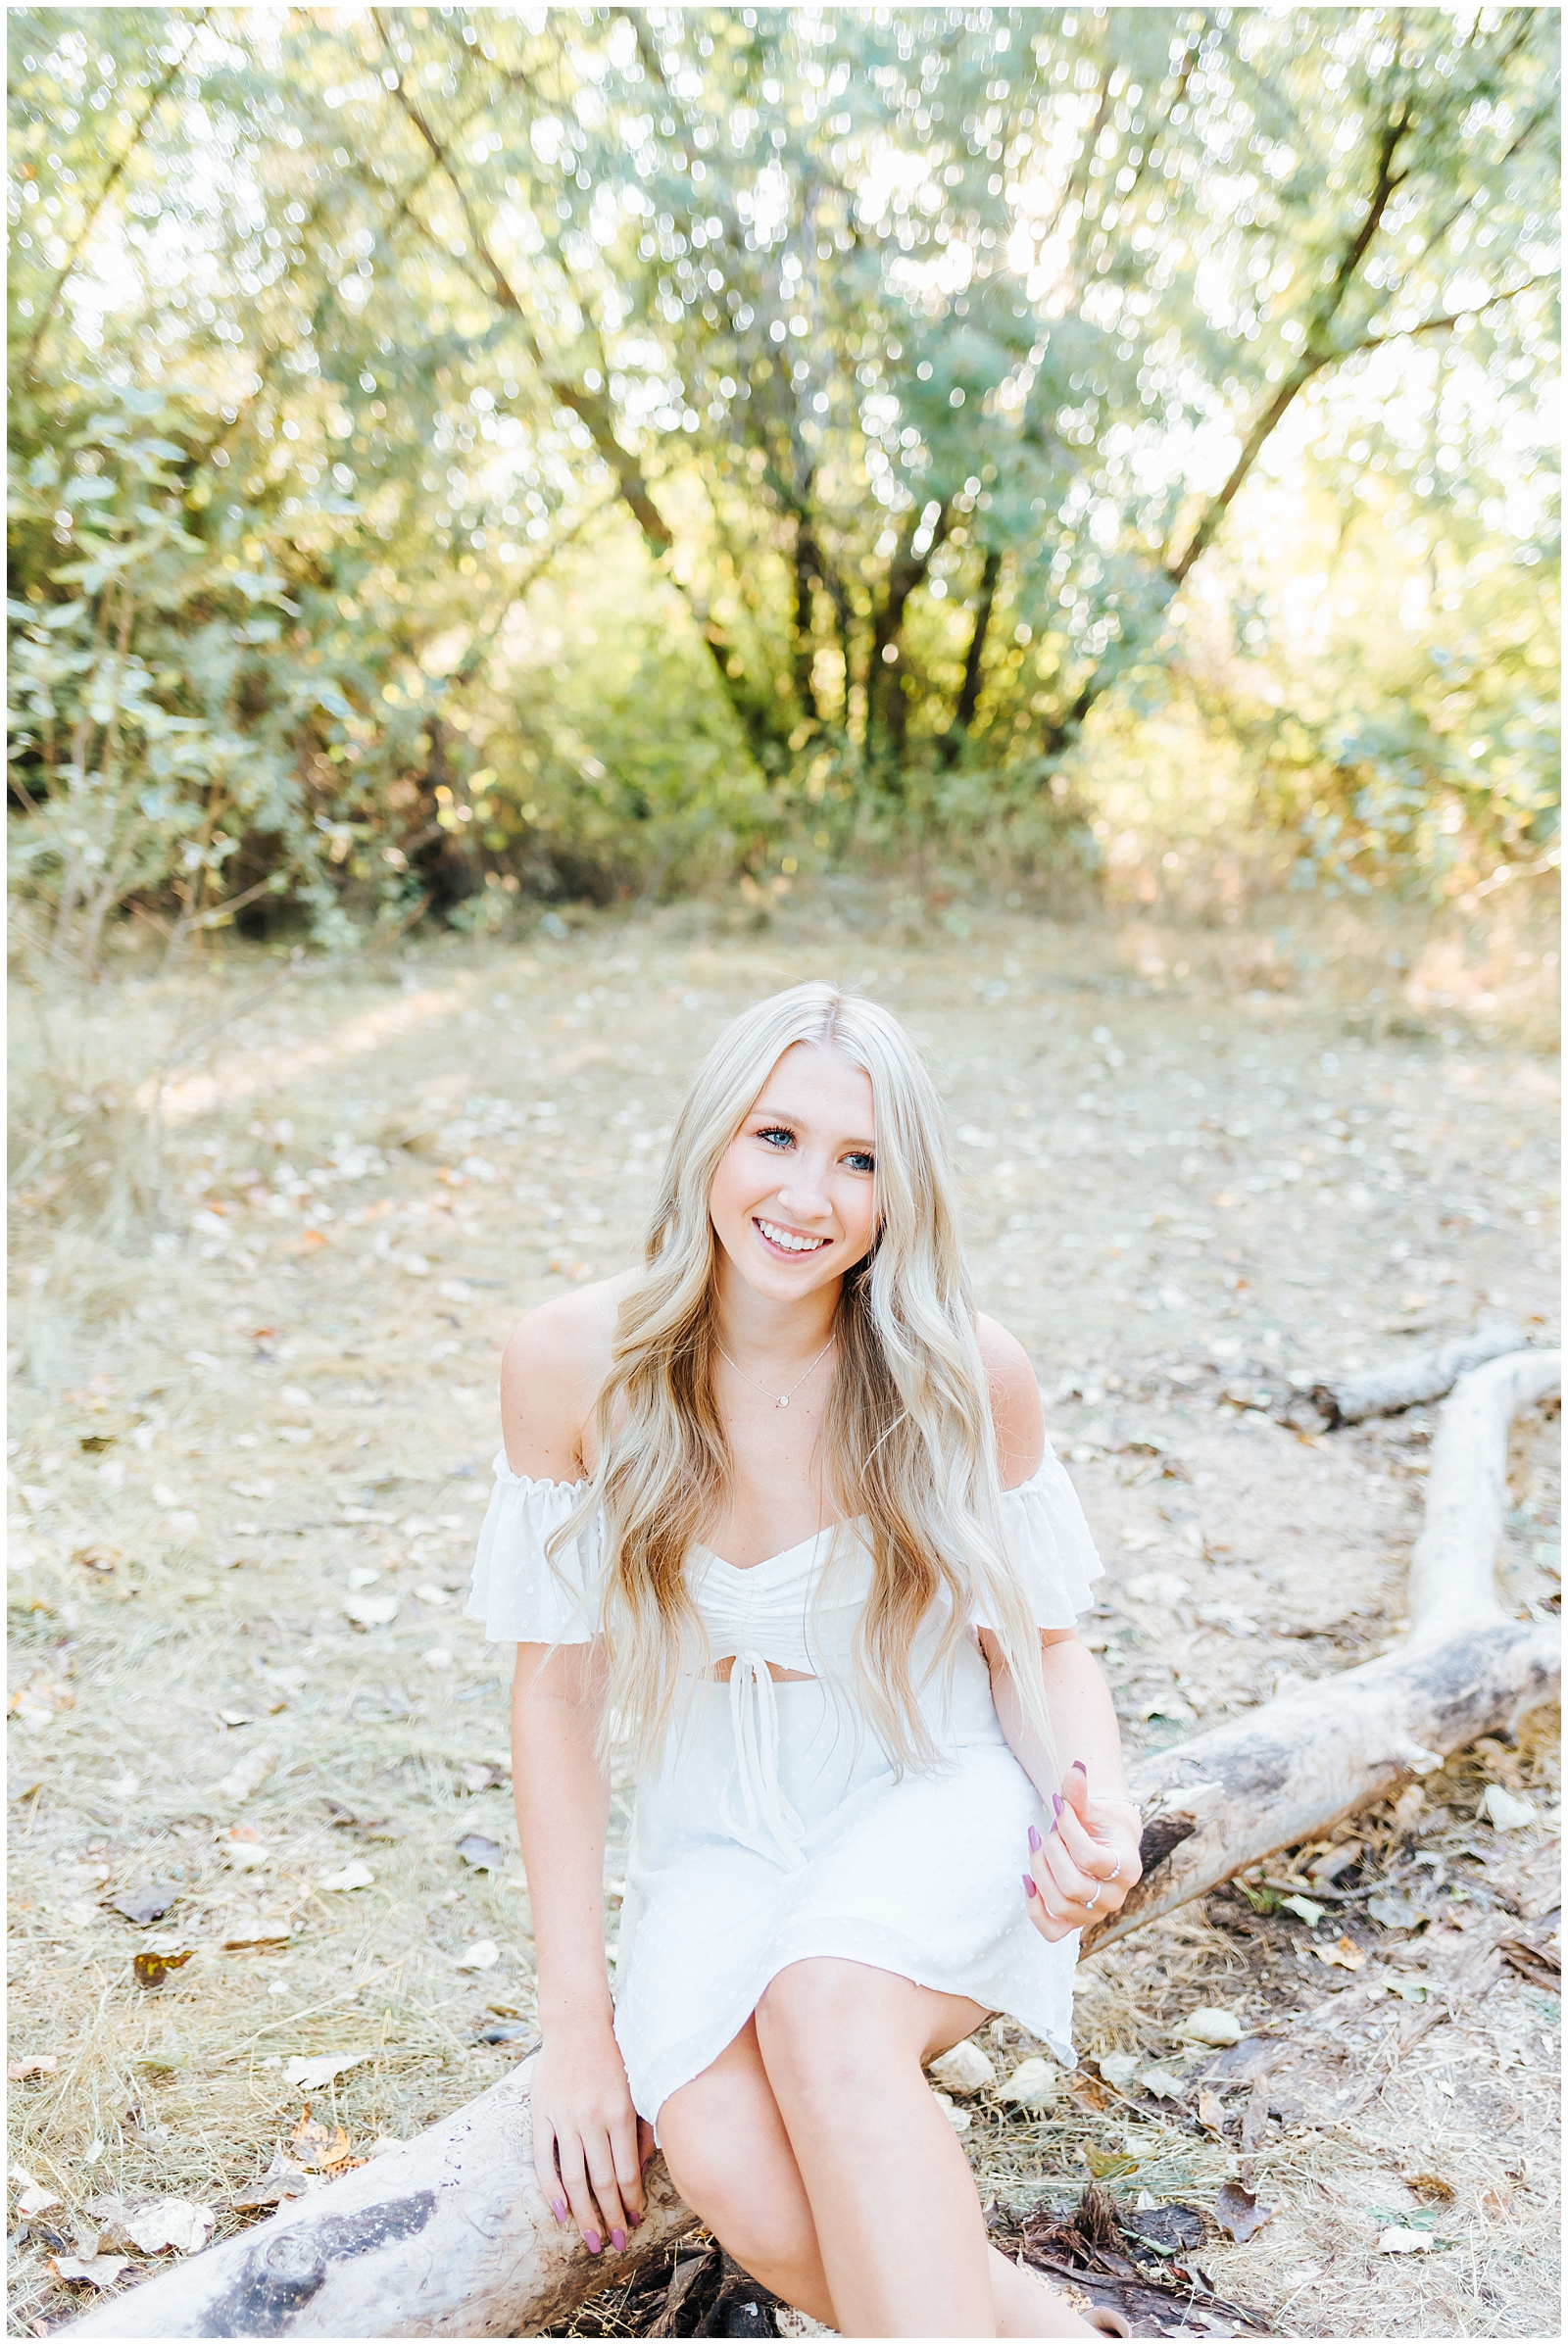 Dreamy Senior Session by the Boise River